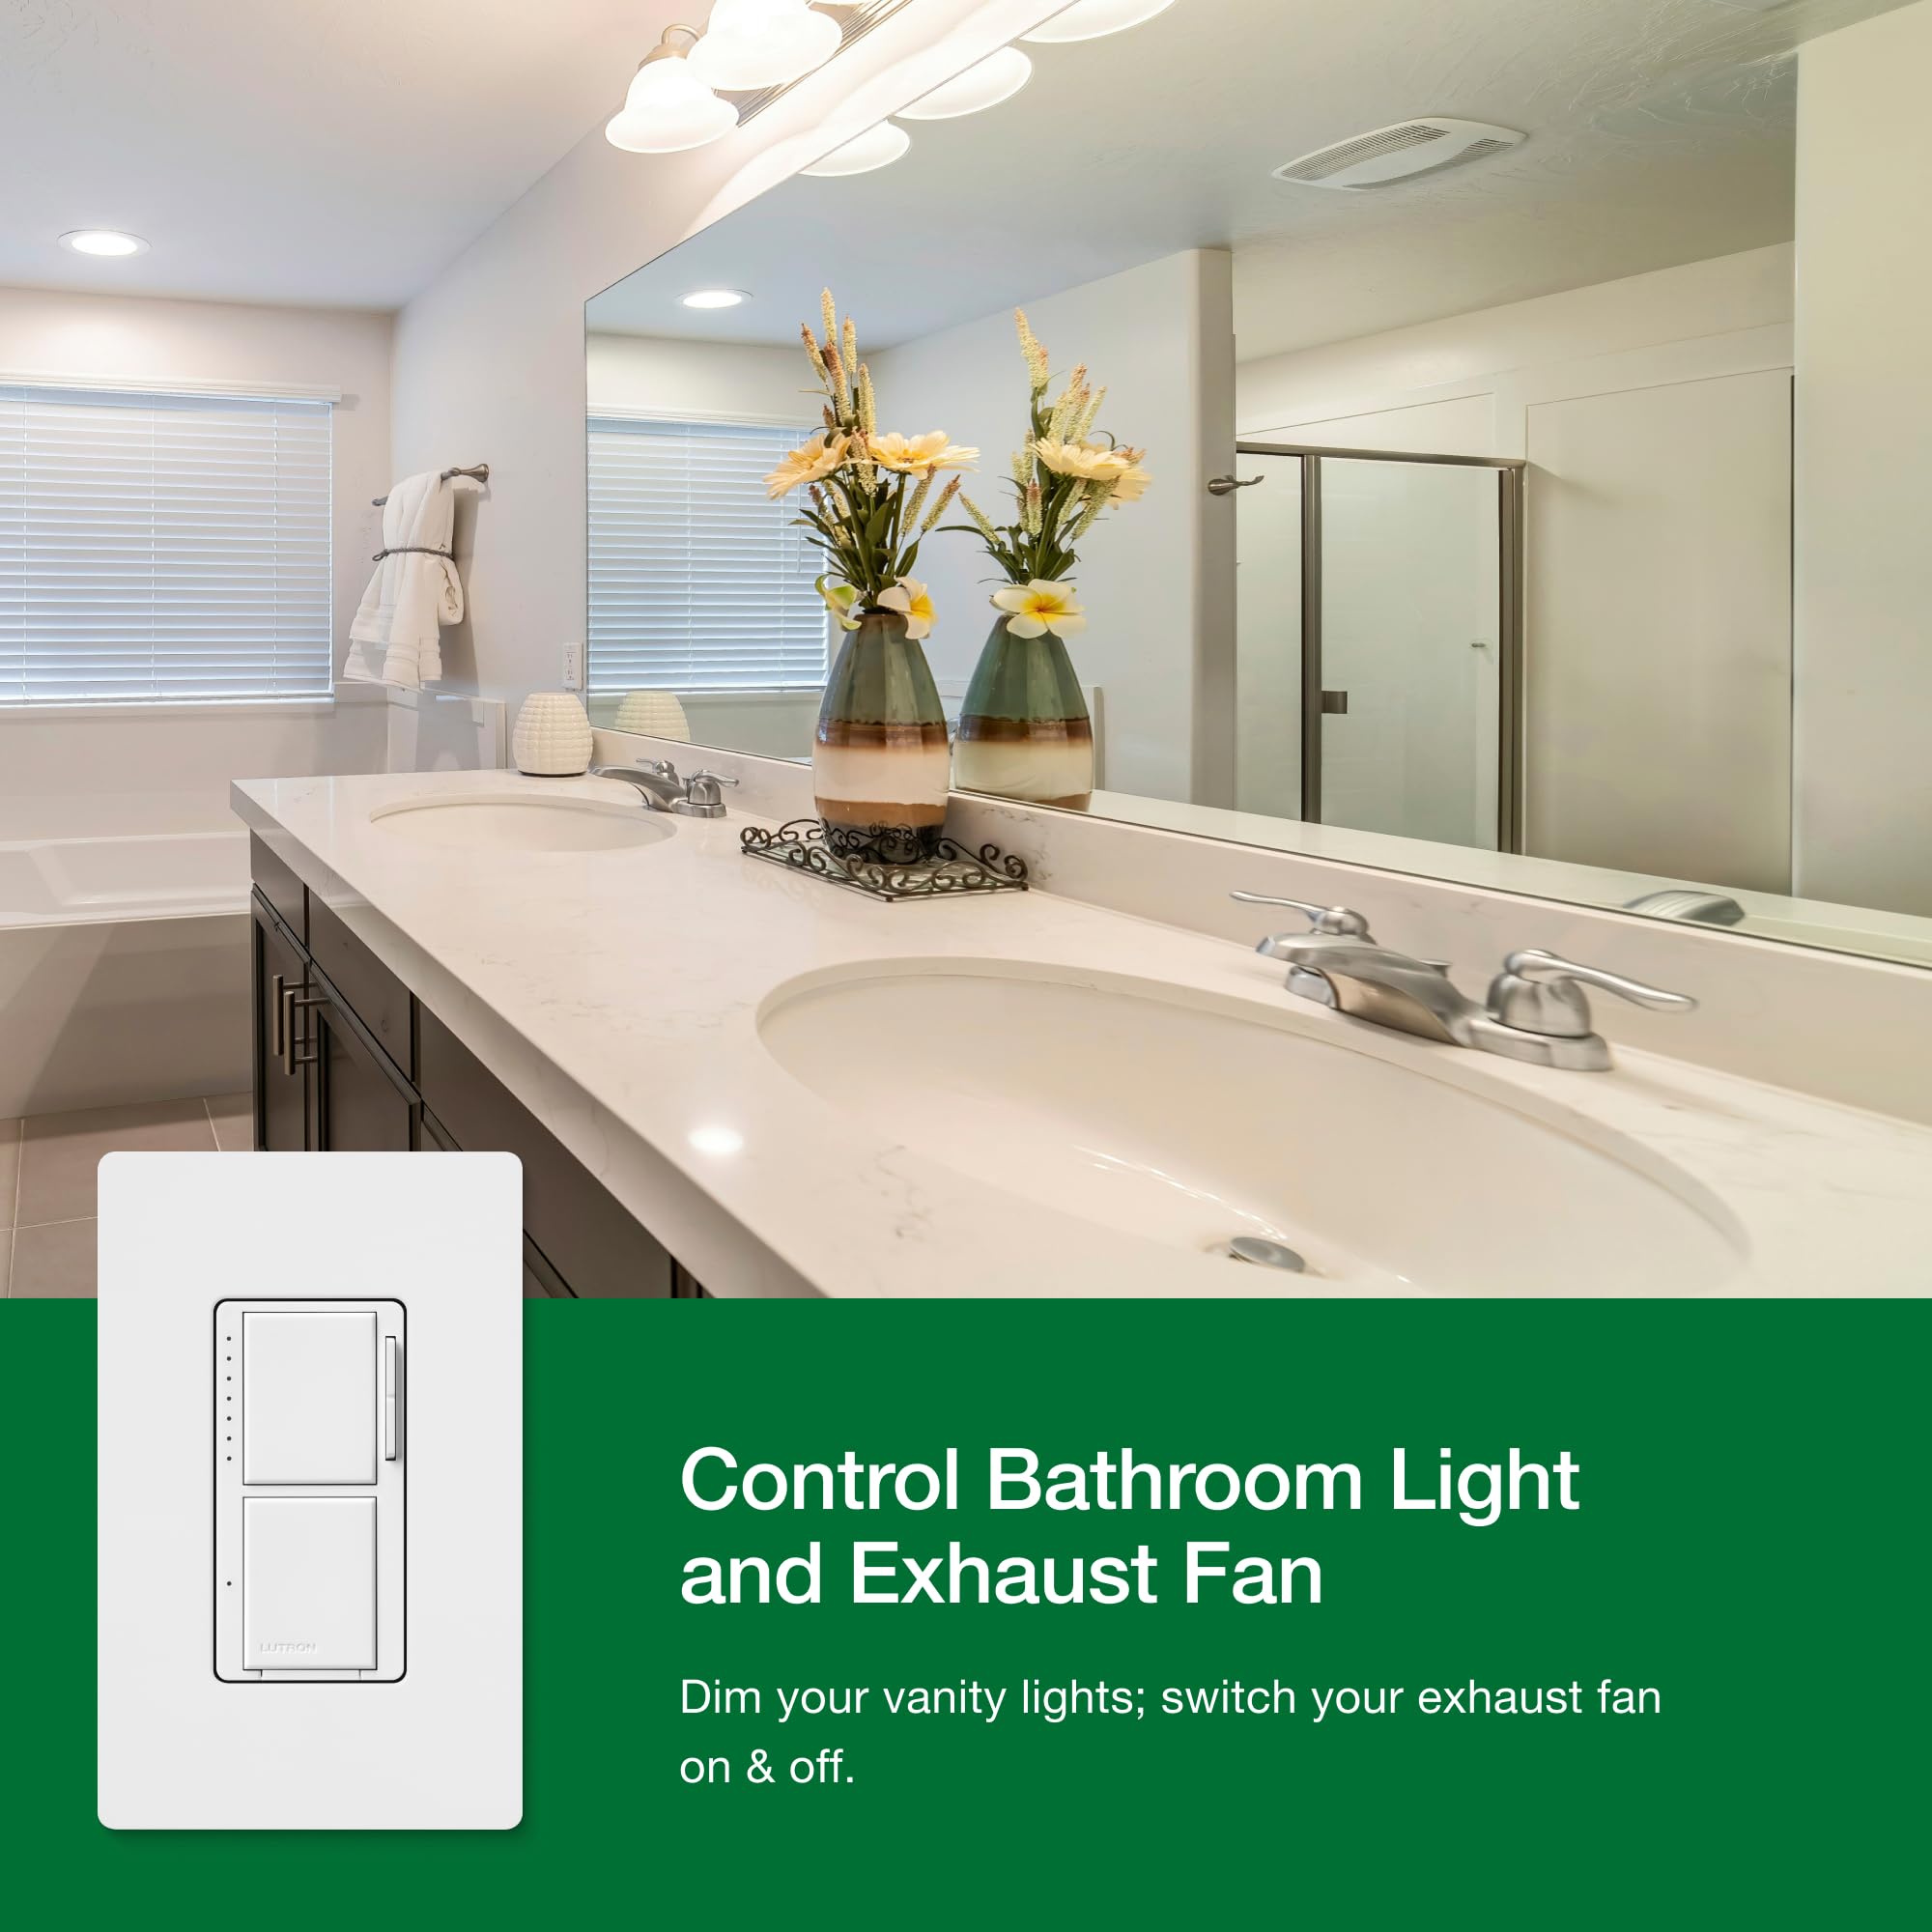 Lutron Maestro LED+ Dual Dimmer and Switch | 75-Watt LED Bulbs/2.5A Fans, Single-Pole | MACL-L3S25-WH | White